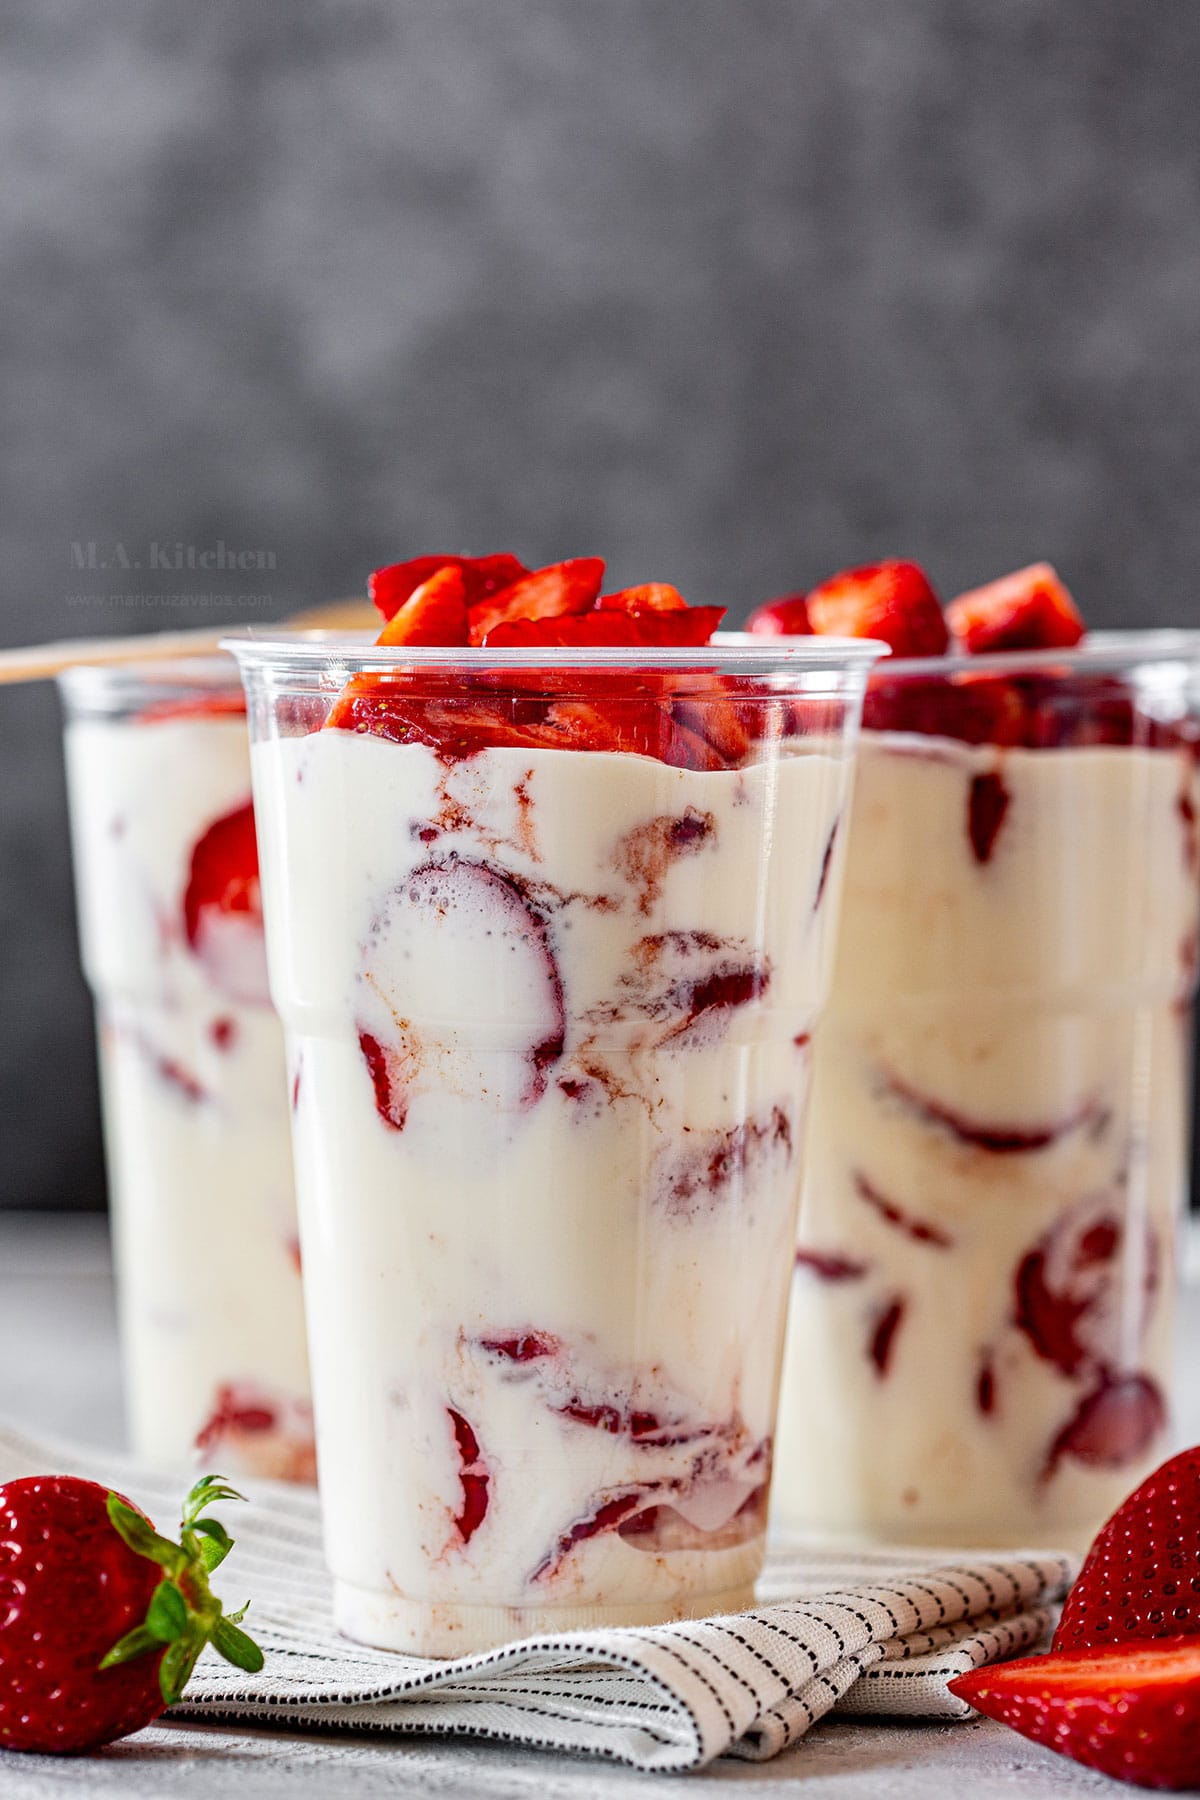 Mexican strawberries and cream Fresas Con Crema, served on cups.